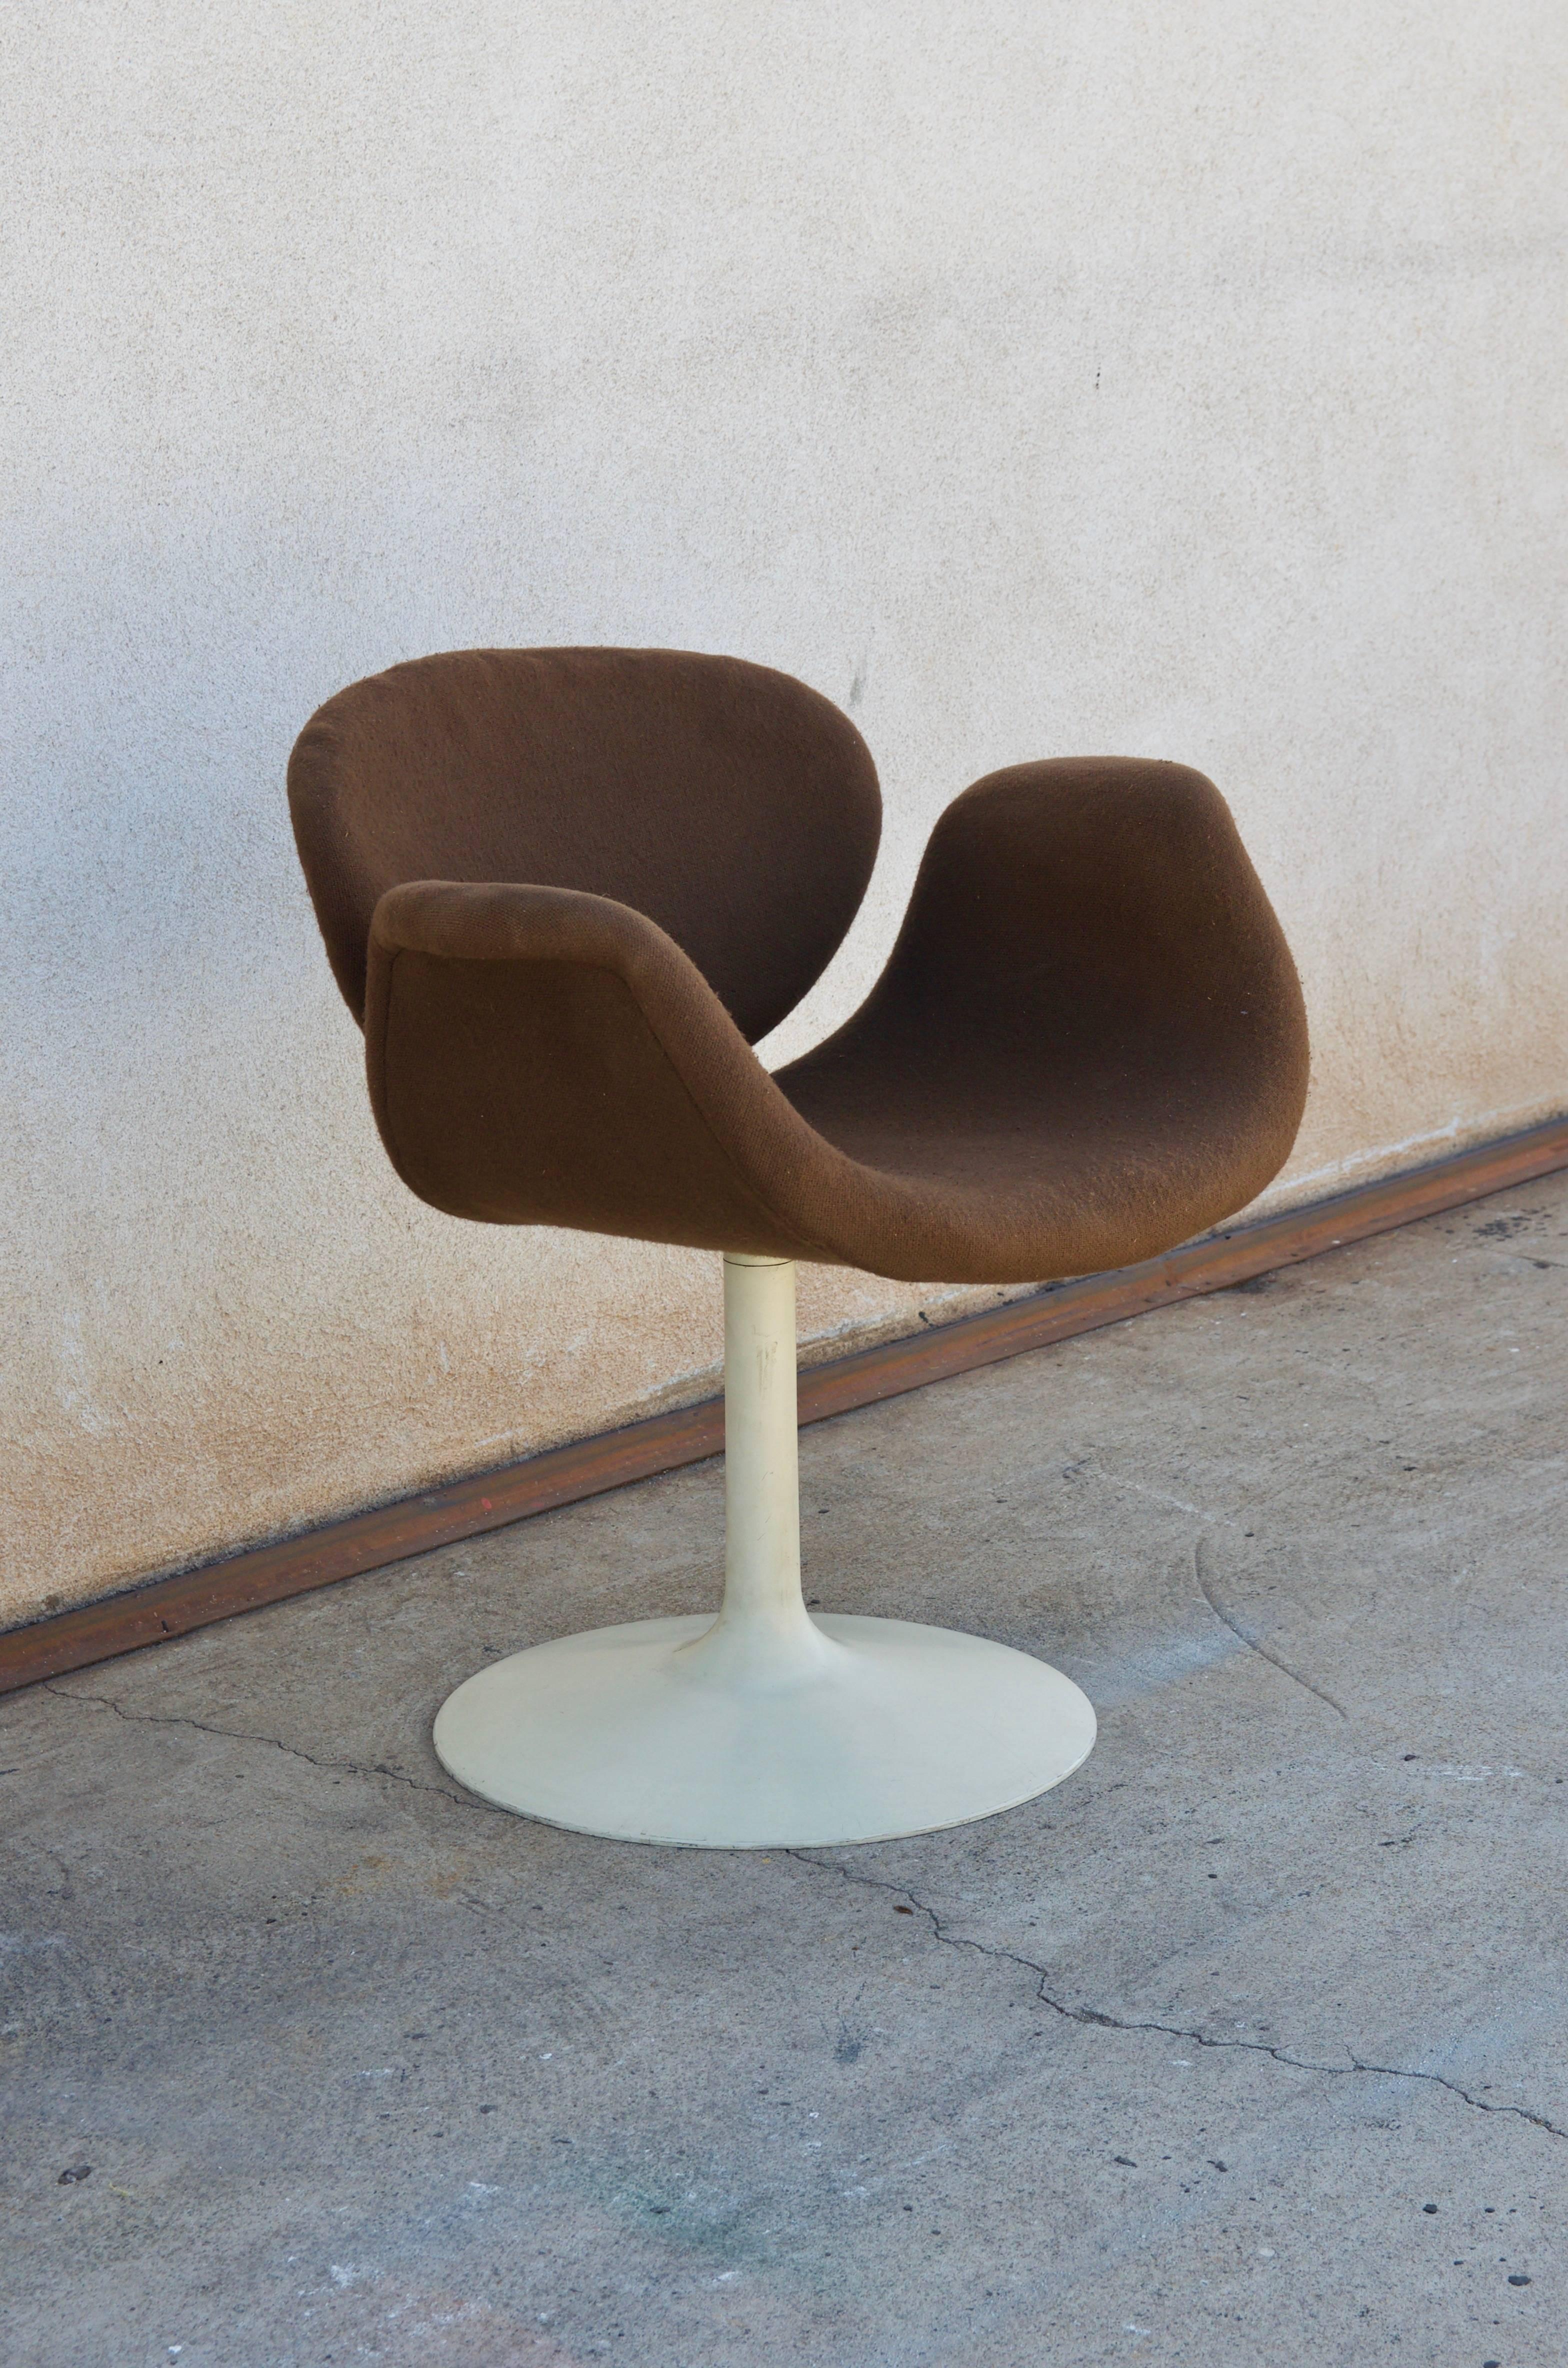 Late 20th Century Pair of Original Little Tulip Chairs by Pierre Paulin for Artifort